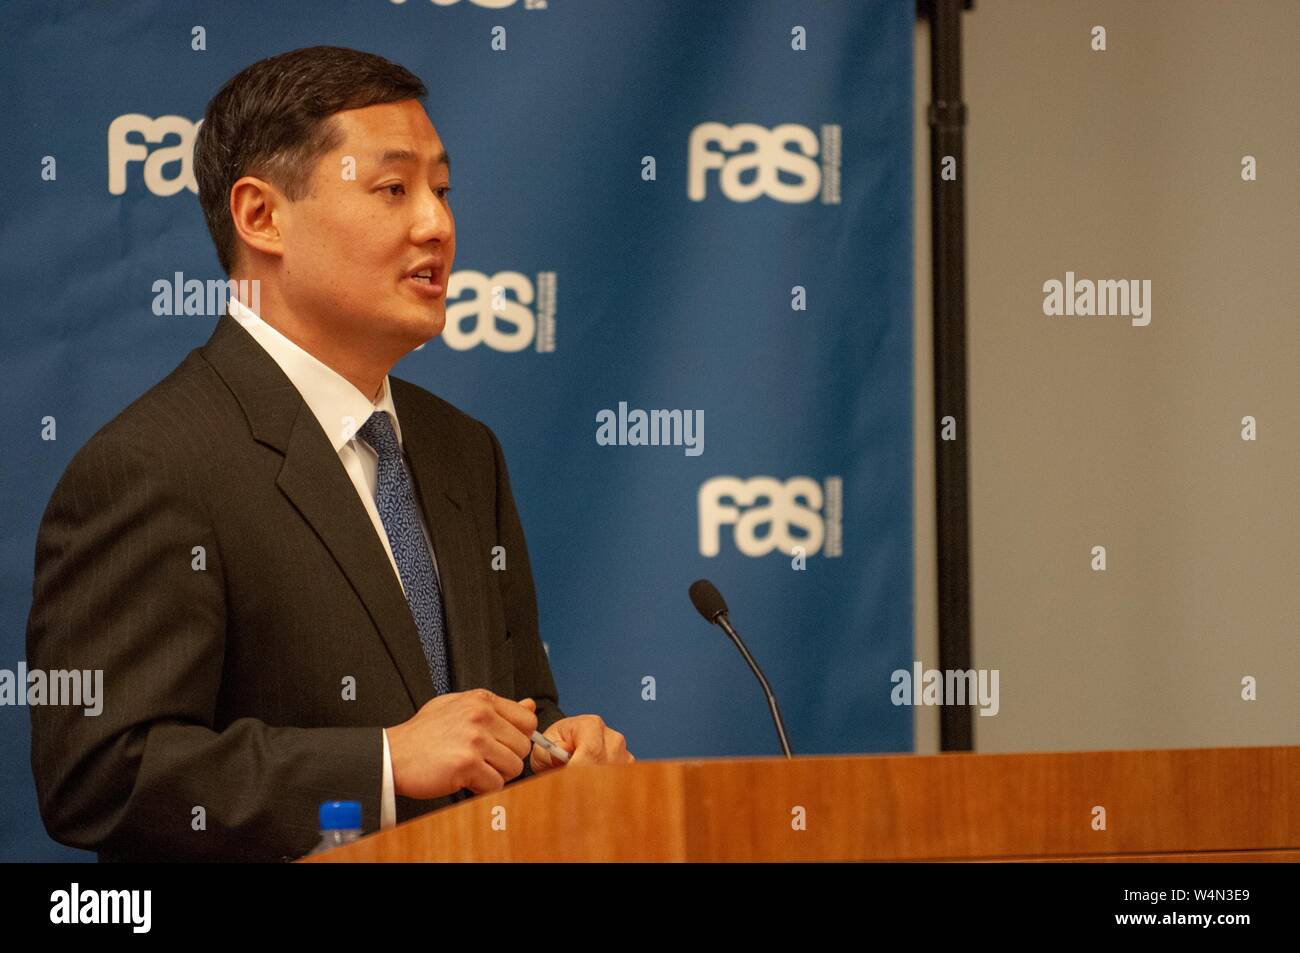 Politician John Yoo speaks during a Foreign Affairs Symposium at the Johns Hopkins University in Baltimore, Maryland, February 17, 2010. From the Homewood Photography collection. () Stock Photo